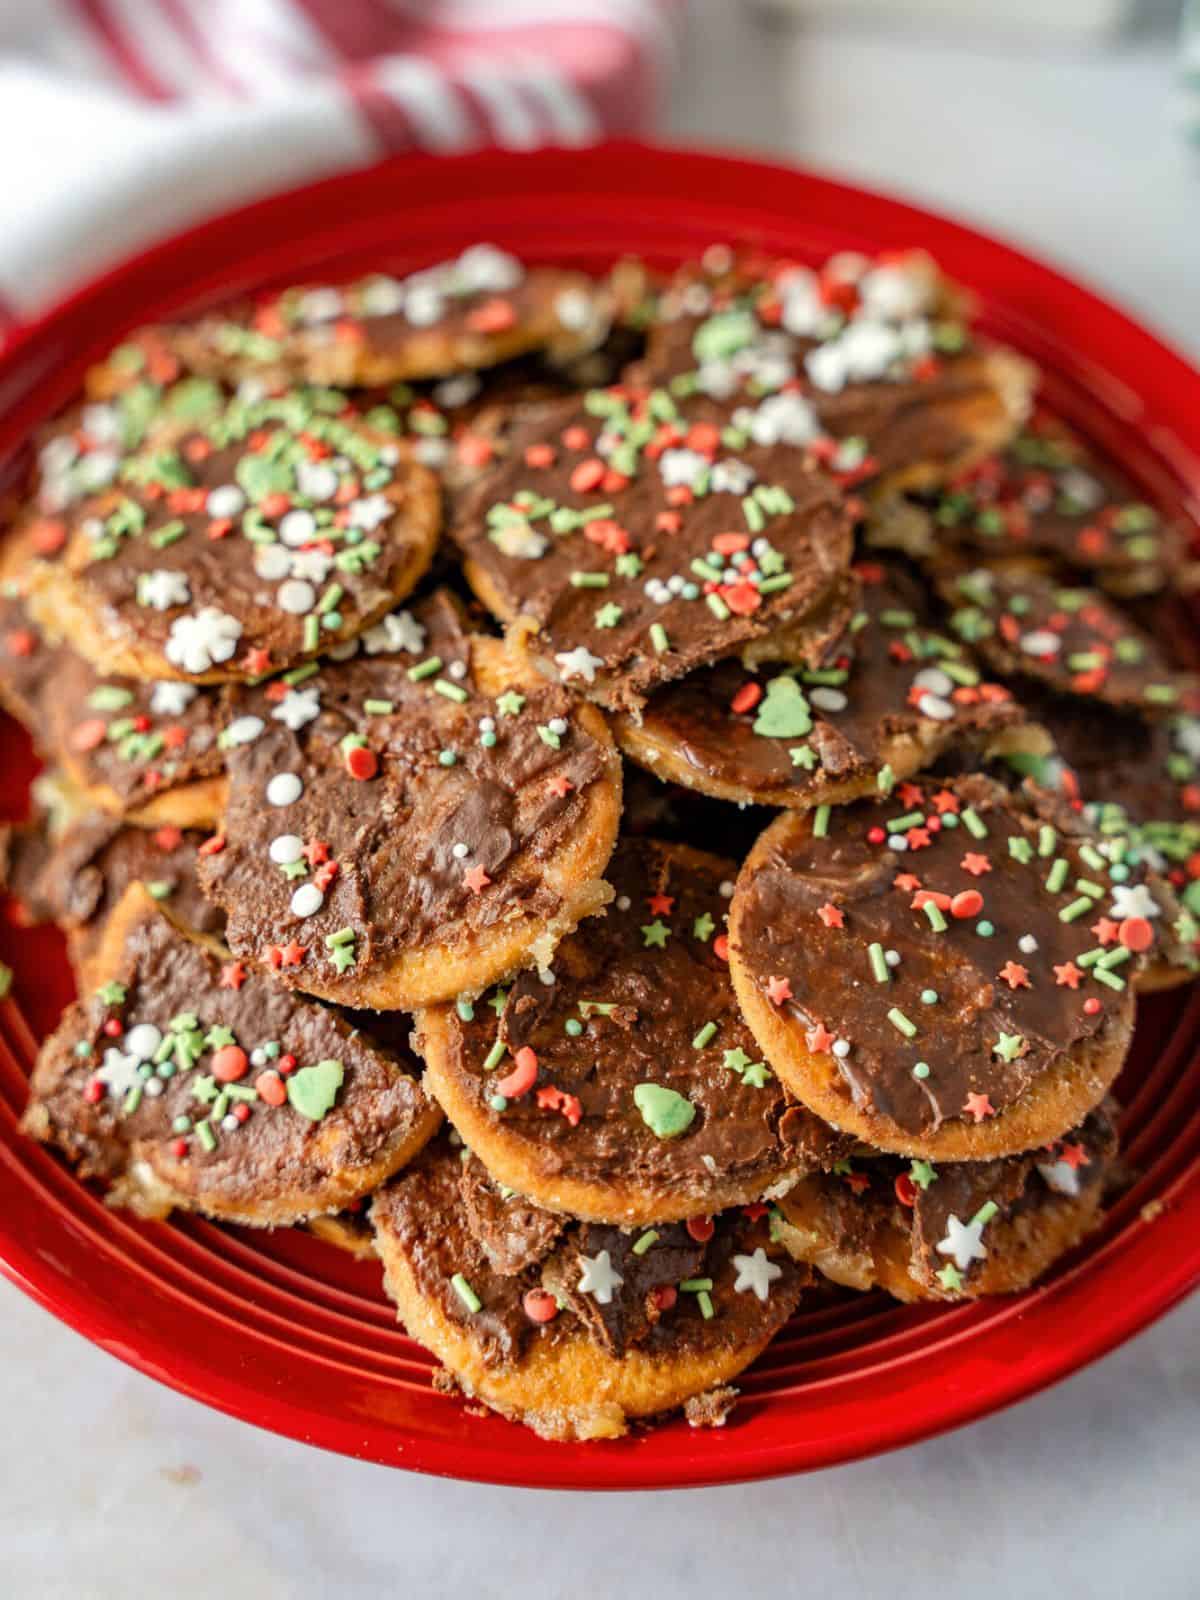 Cookie toffee on a red plate with Christmas sprinkles.